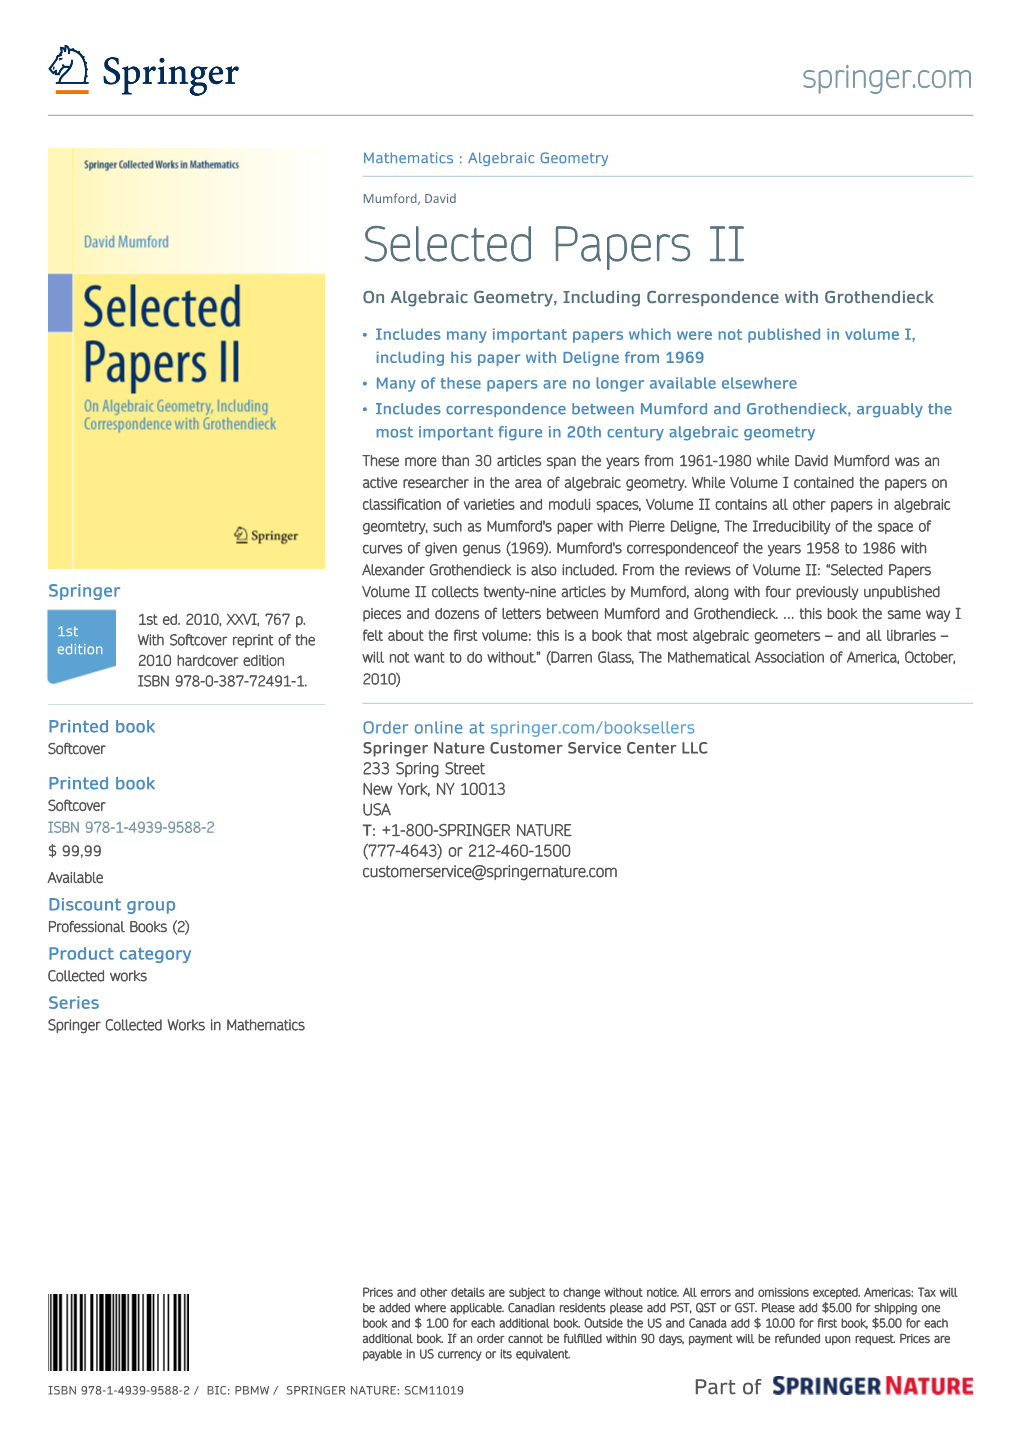 Selected Papers II on Algebraic Geometry, Including Correspondence with Grothendieck